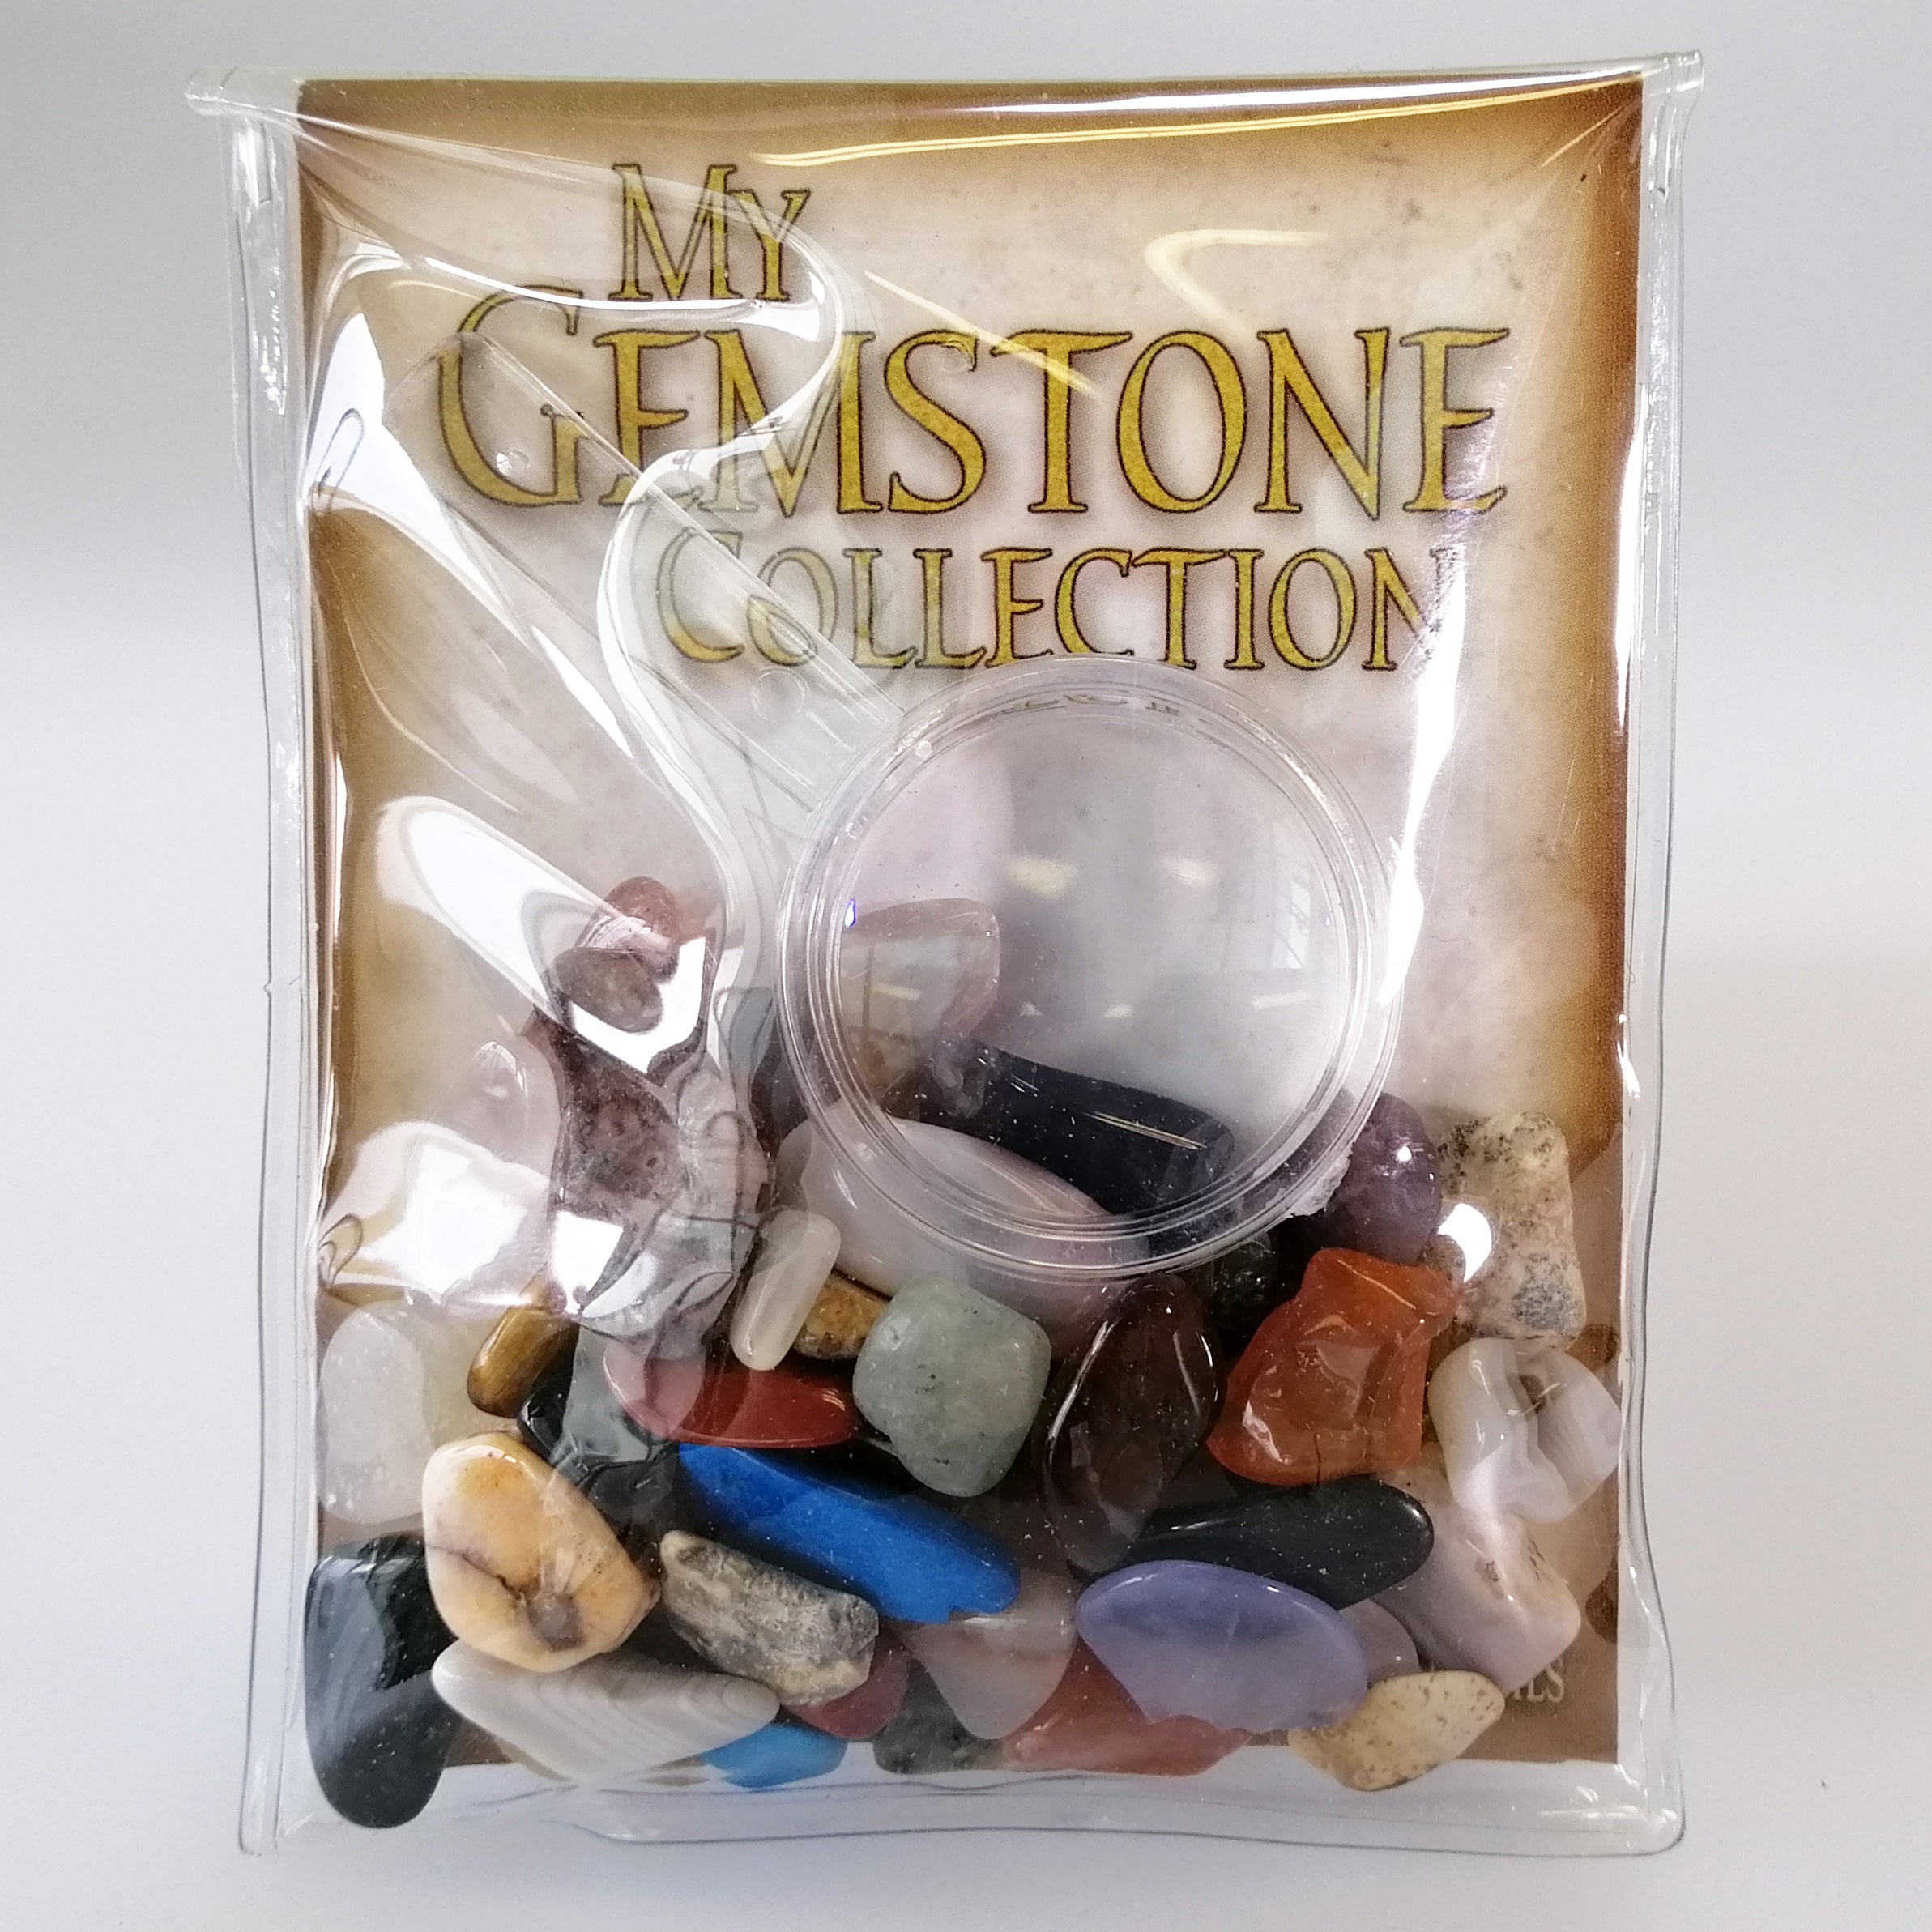 My Gemstone Collection' Pouch